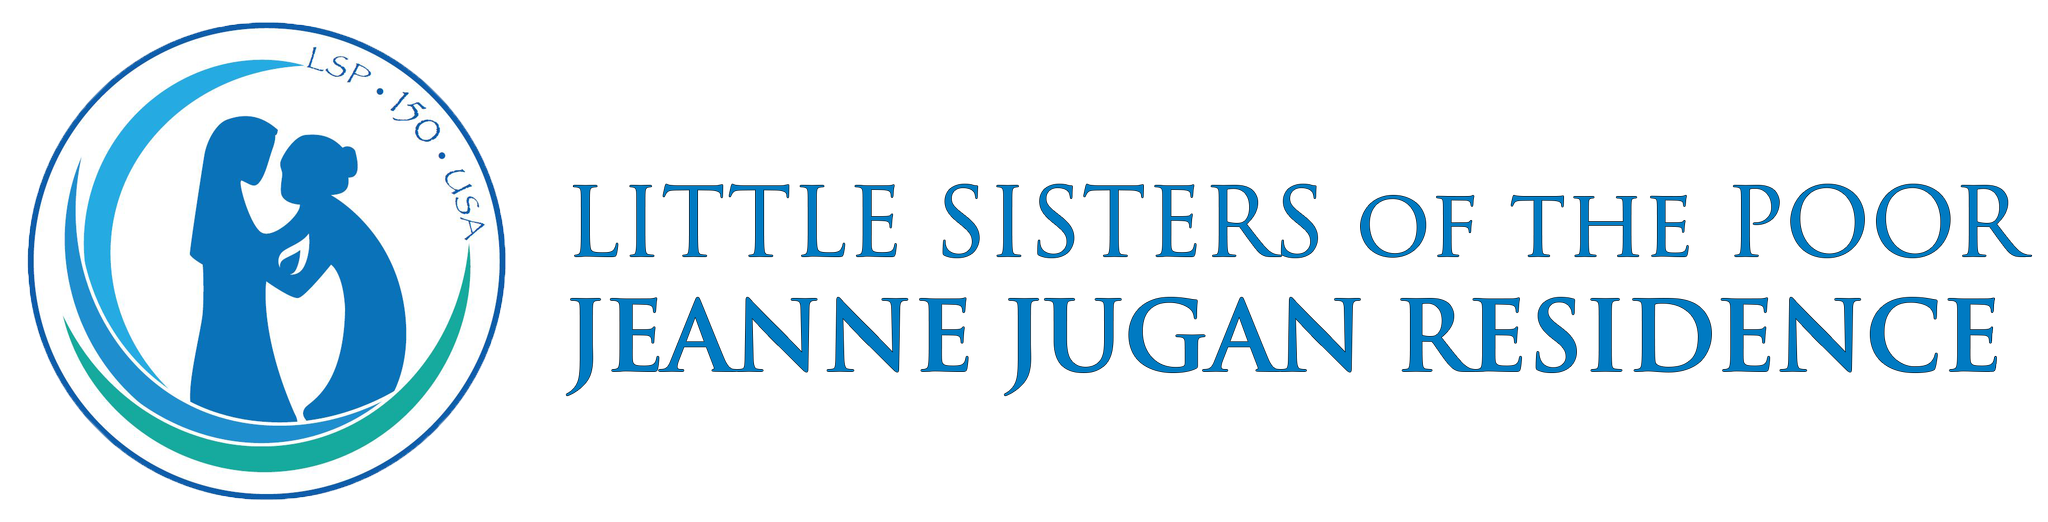 Little Sisters of the Poor Boston